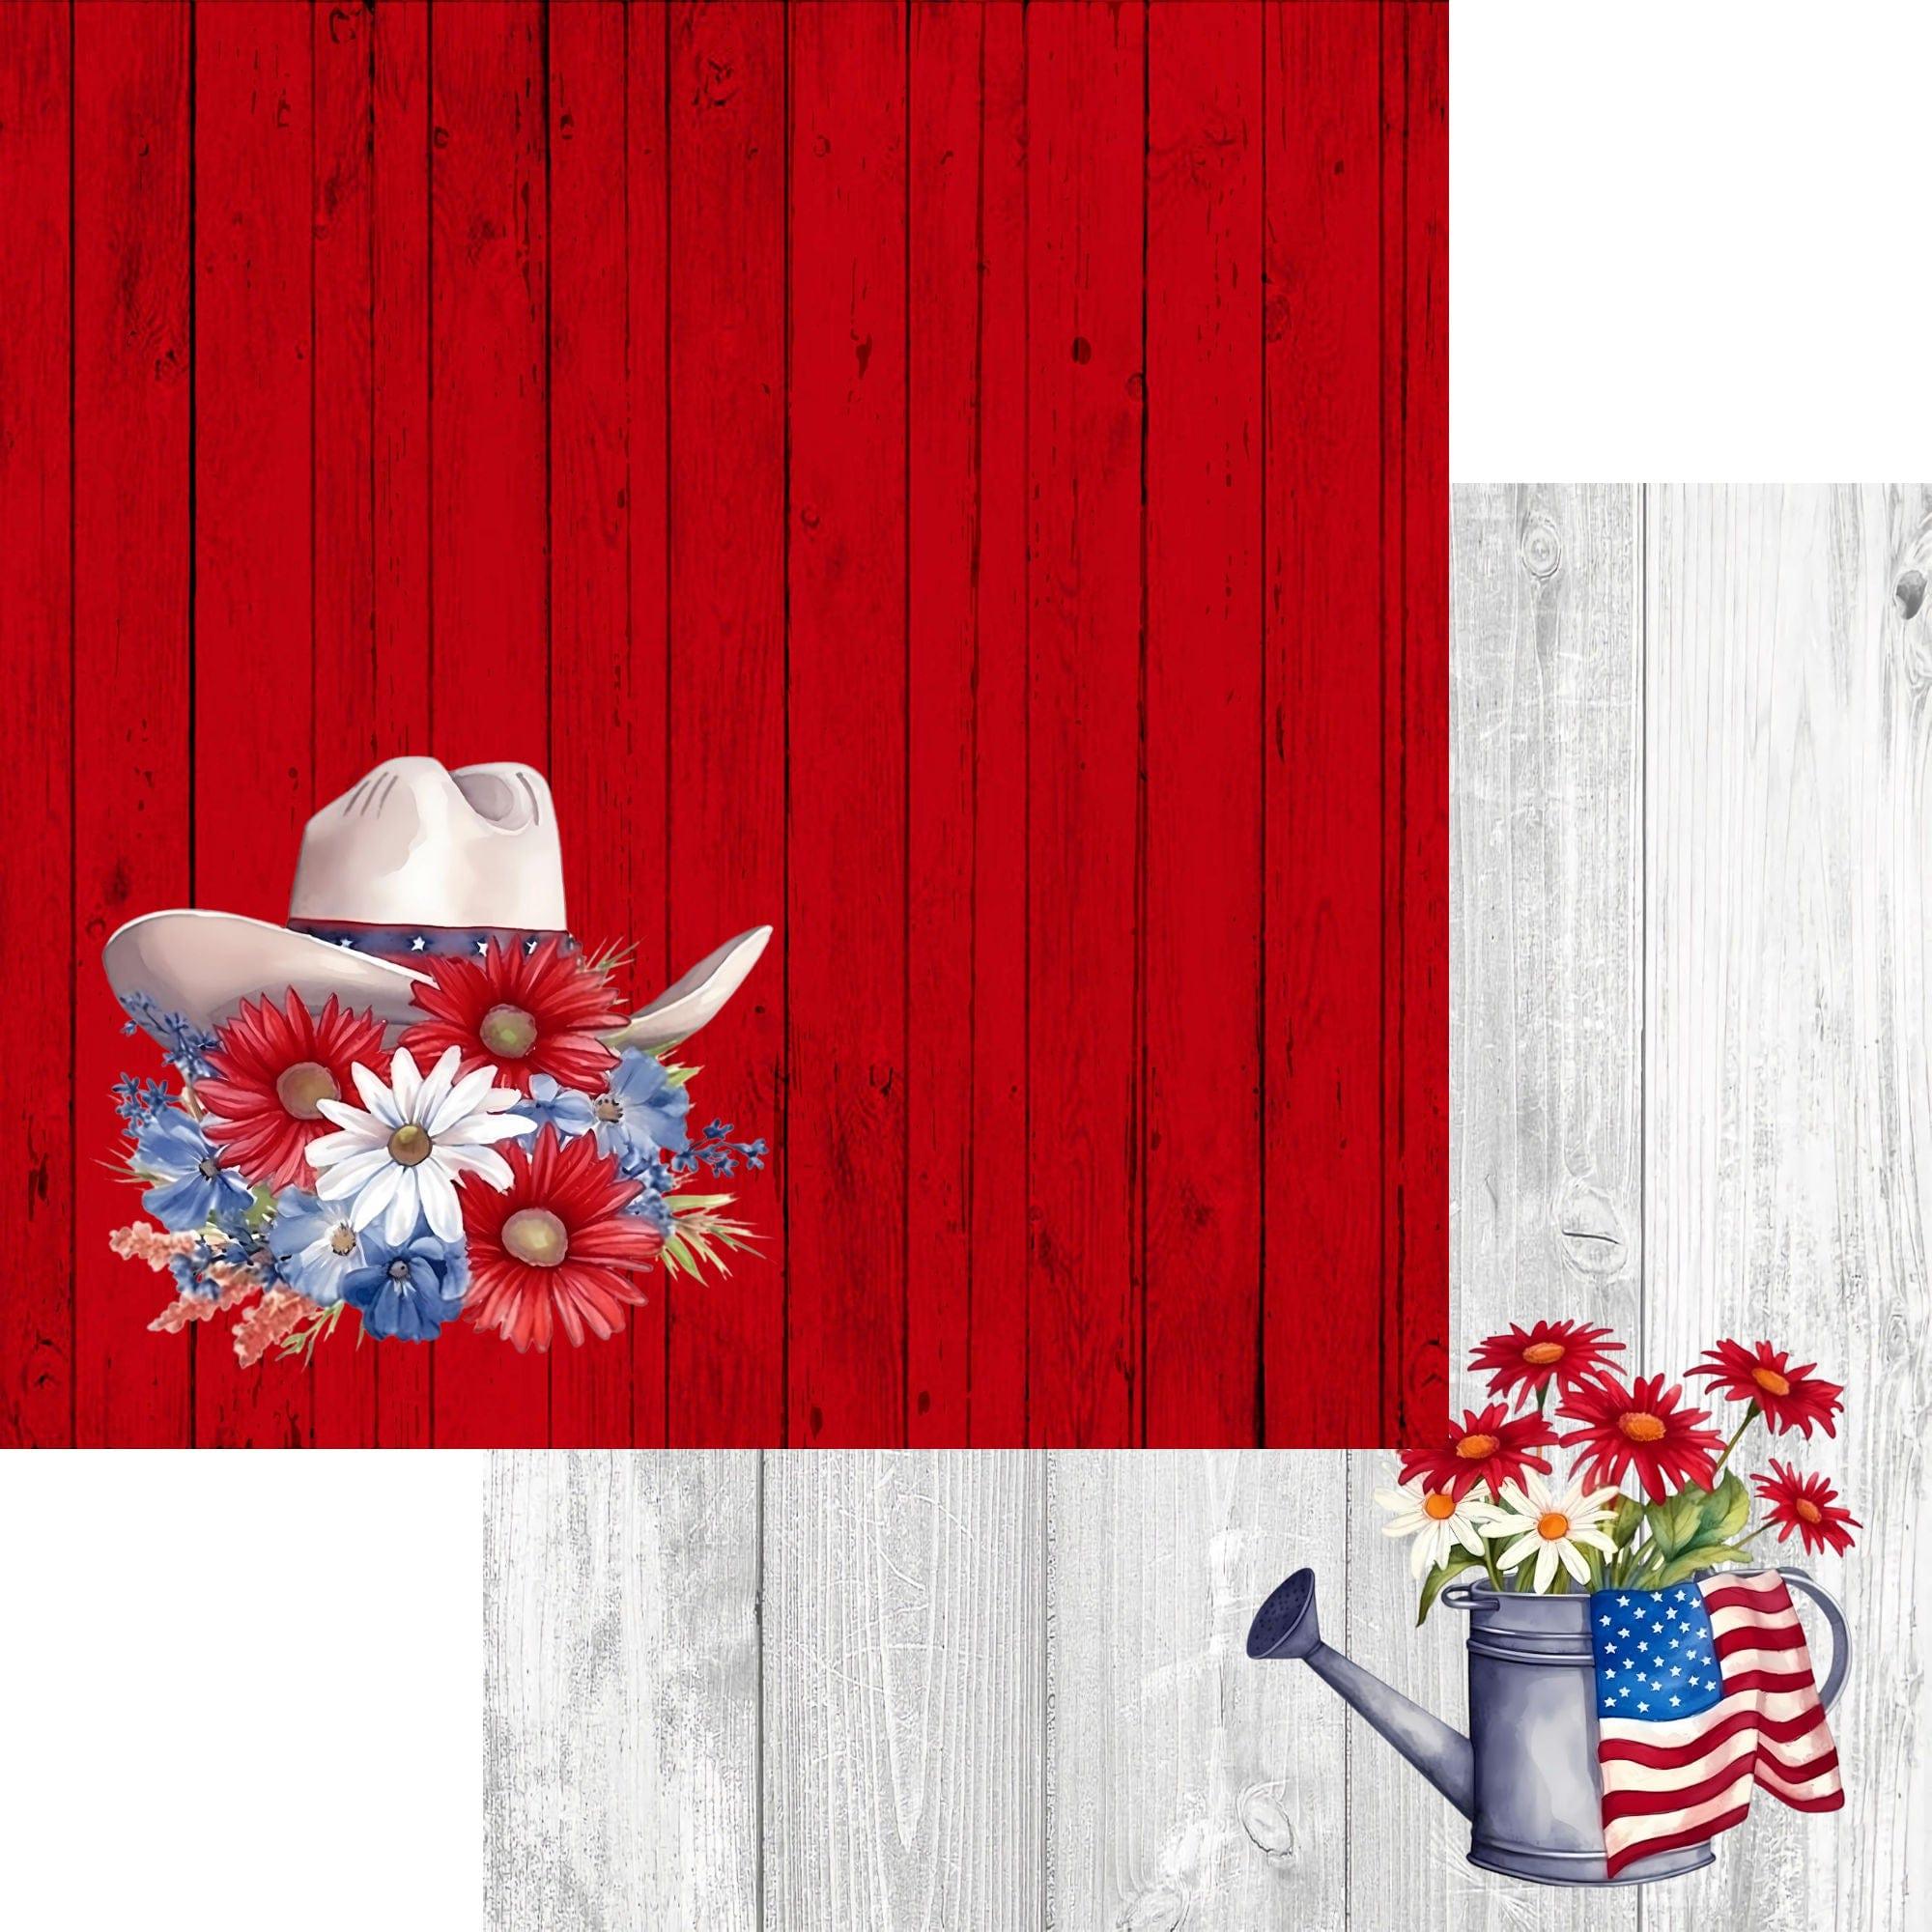 Star Spangled Spurs Collection Cowboy Hat 12 x 12 Double-Sided Scrapbook Paper by SSC Designs - Scrapbook Supply Companies